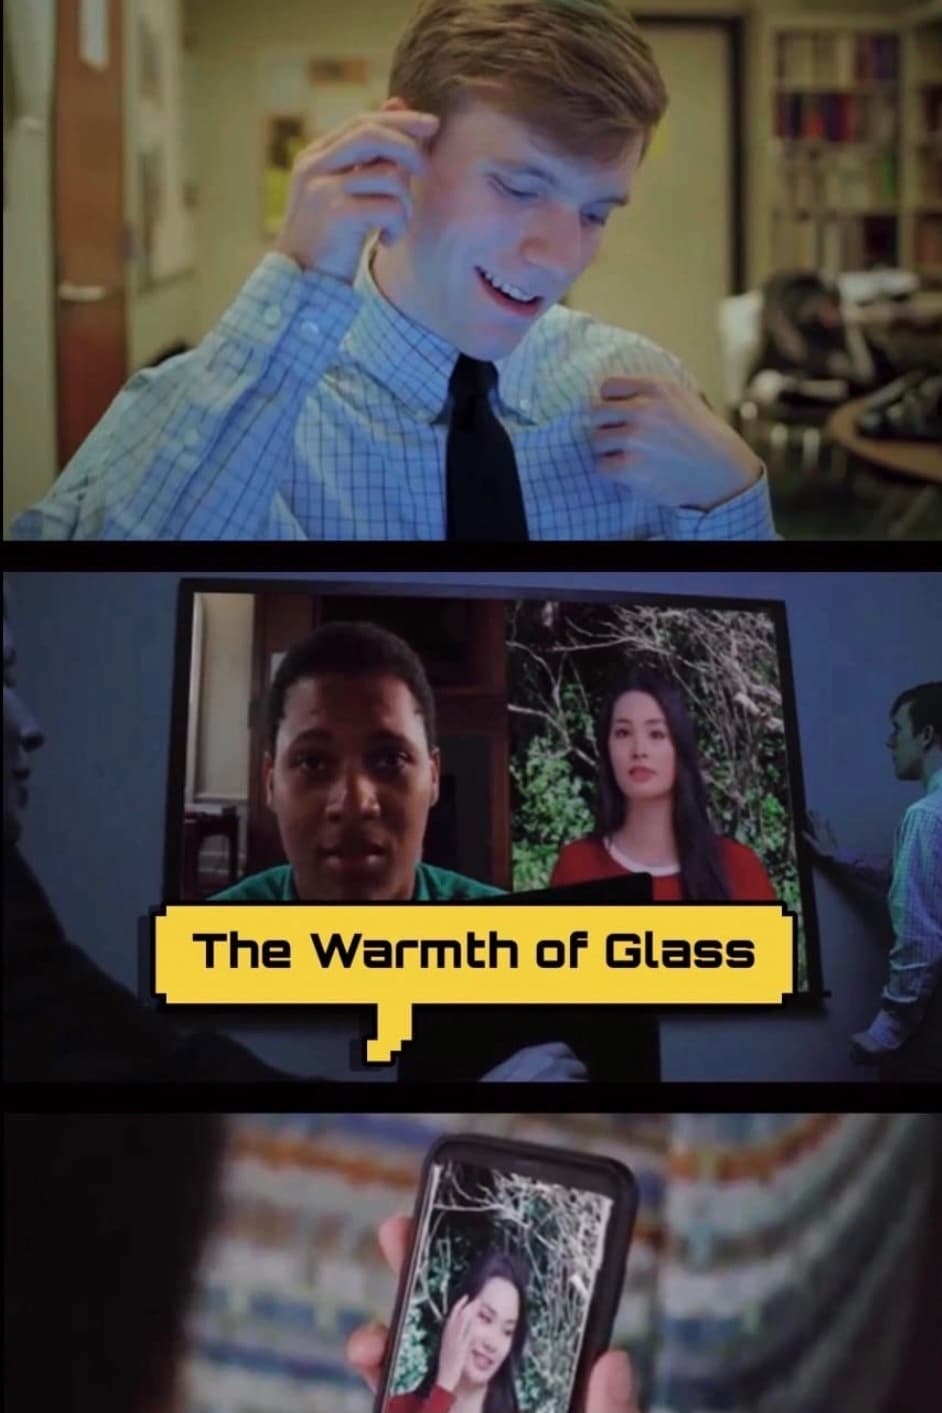 The Warmth of Glass